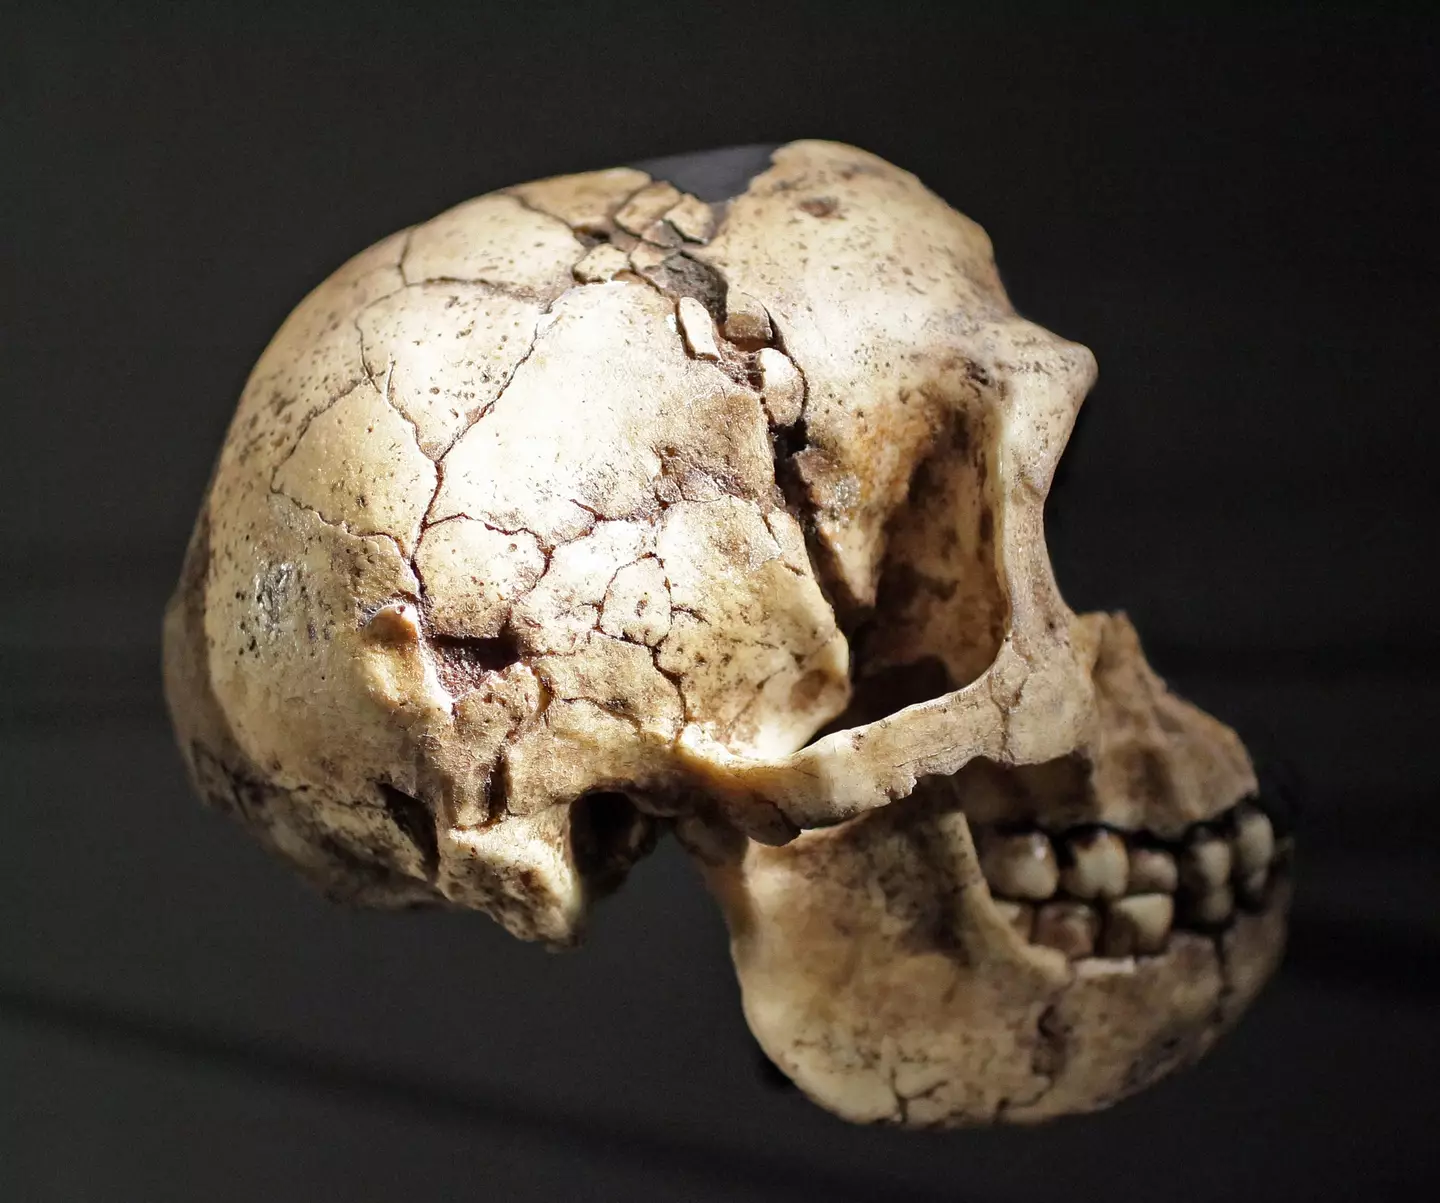 The skull of Homo floresiensis found on Flores.